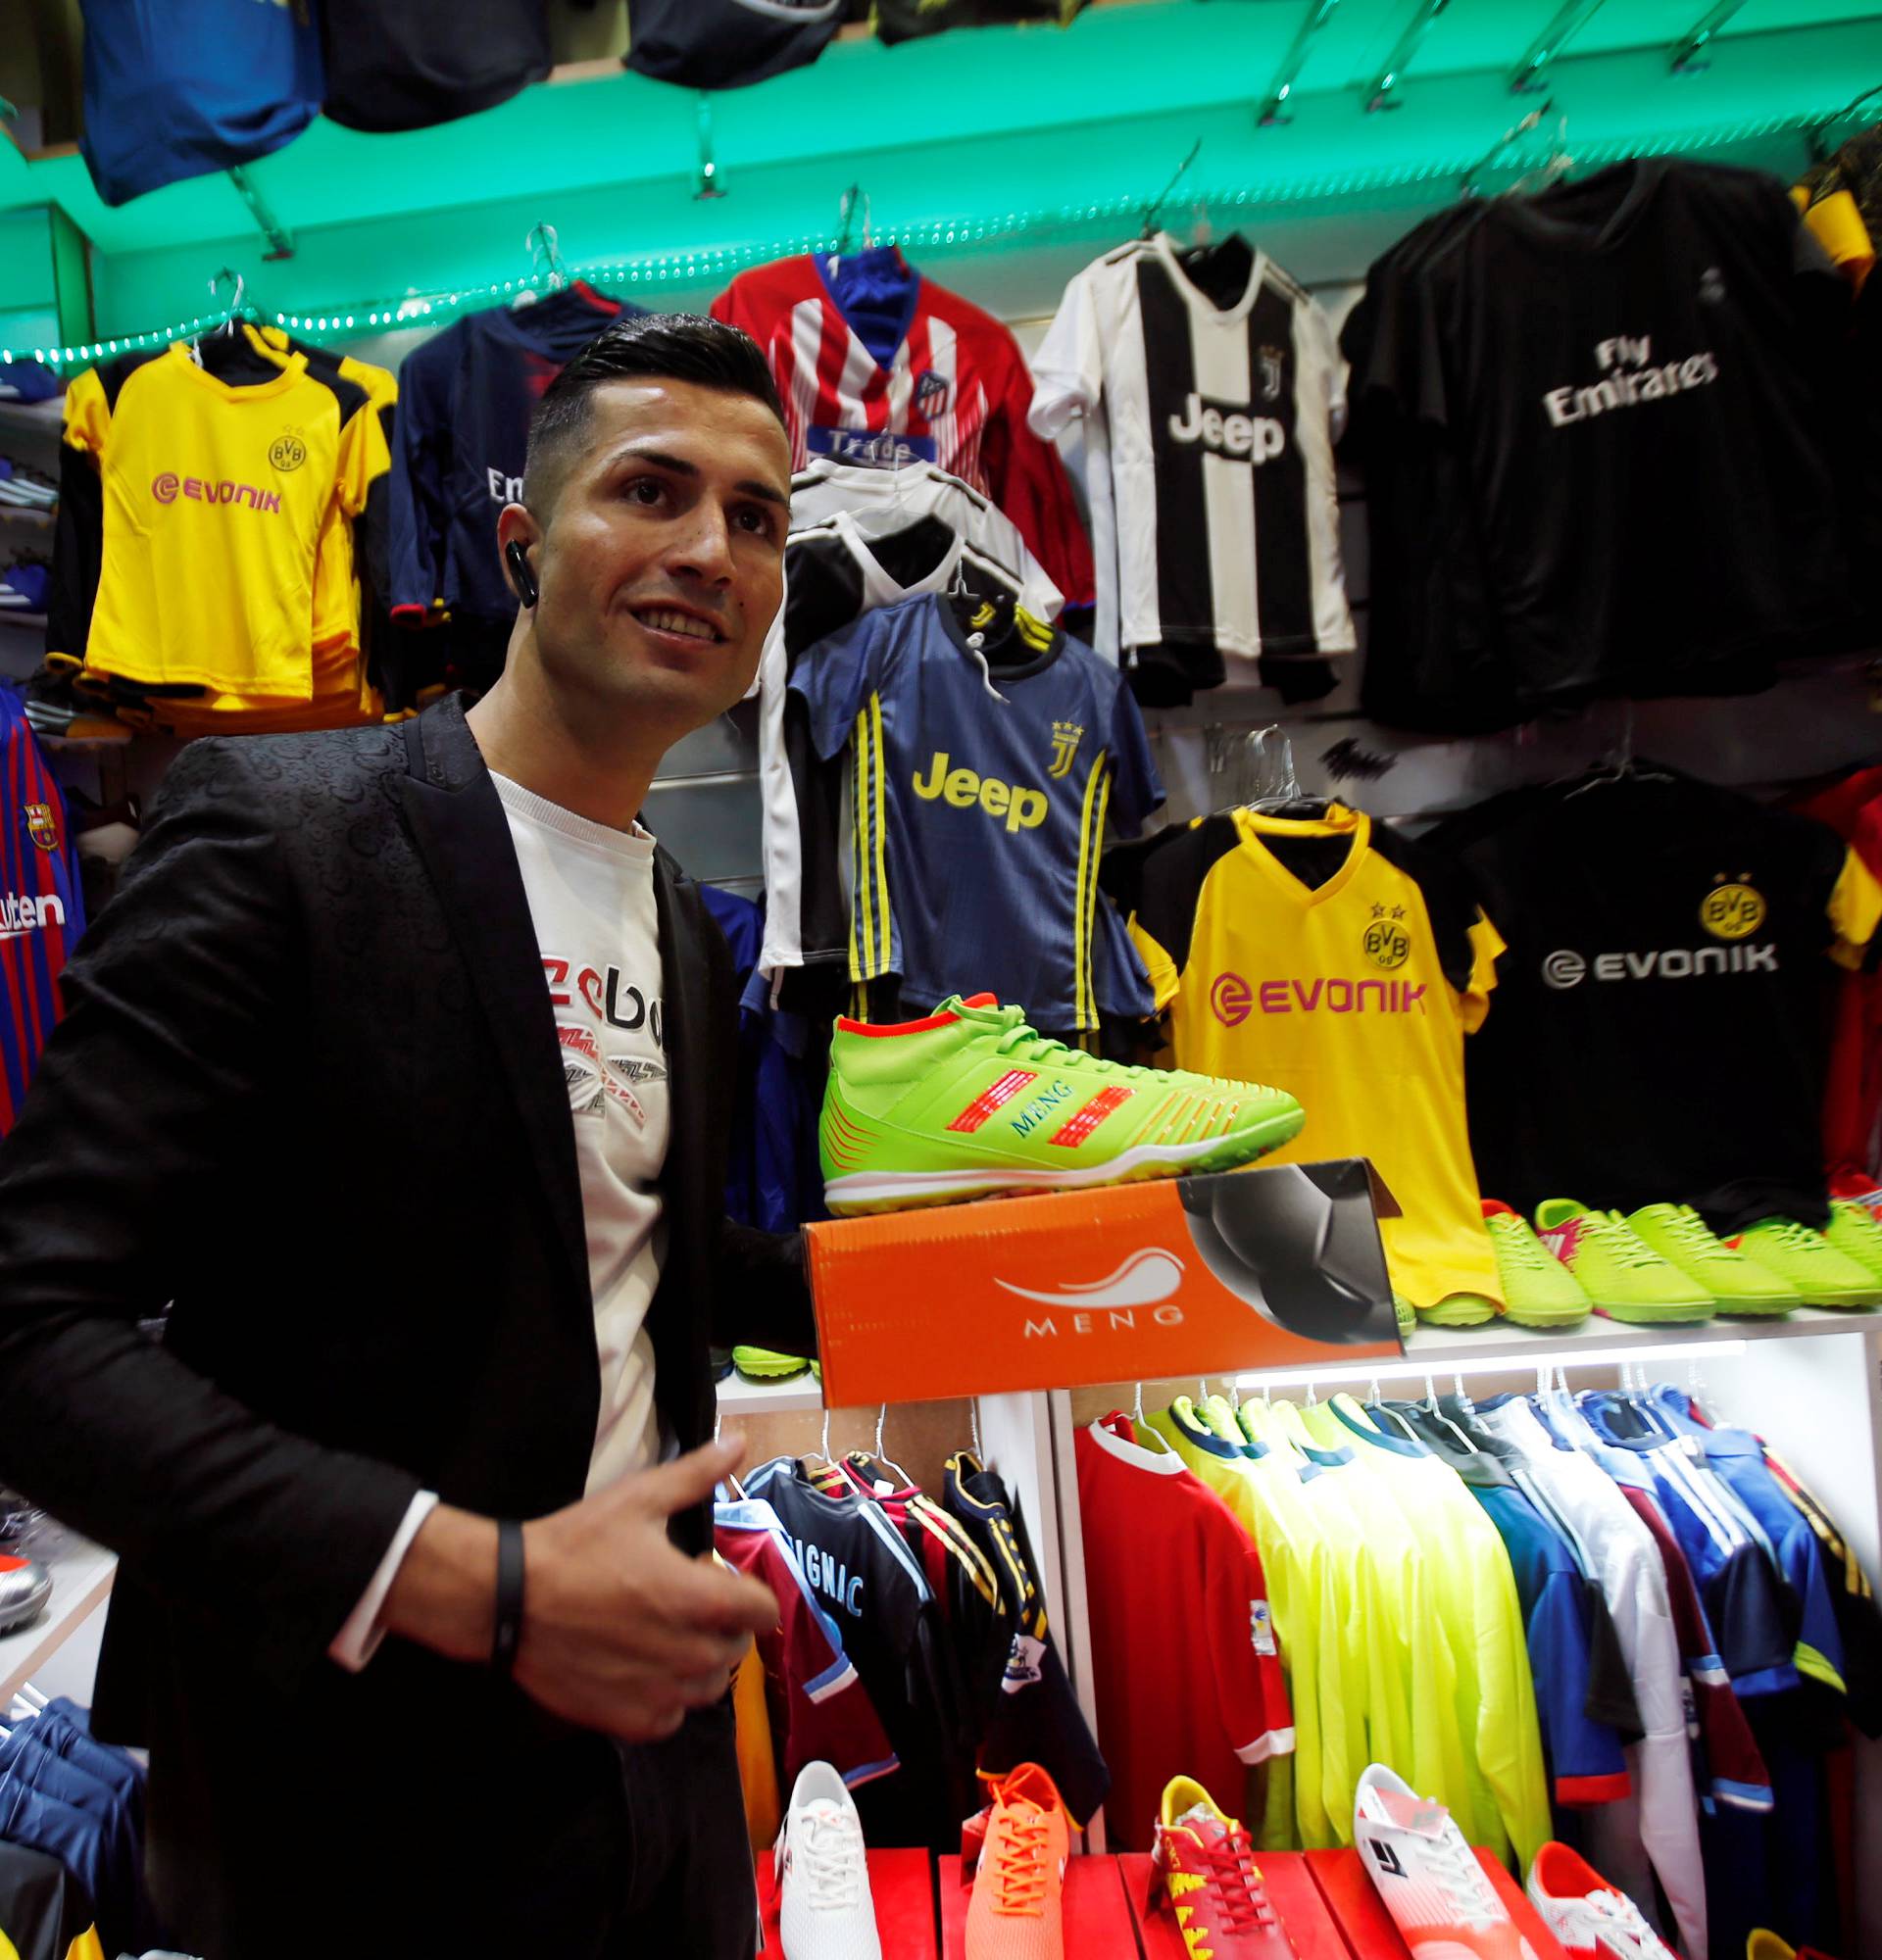 Biwar Abdullah, 25, an Iraqi Kurdish local footballer, who looks like the football player Cristiano Ronaldo, pose for a pictures at a sportswear shop in the district of Soran, northeast of Erbil